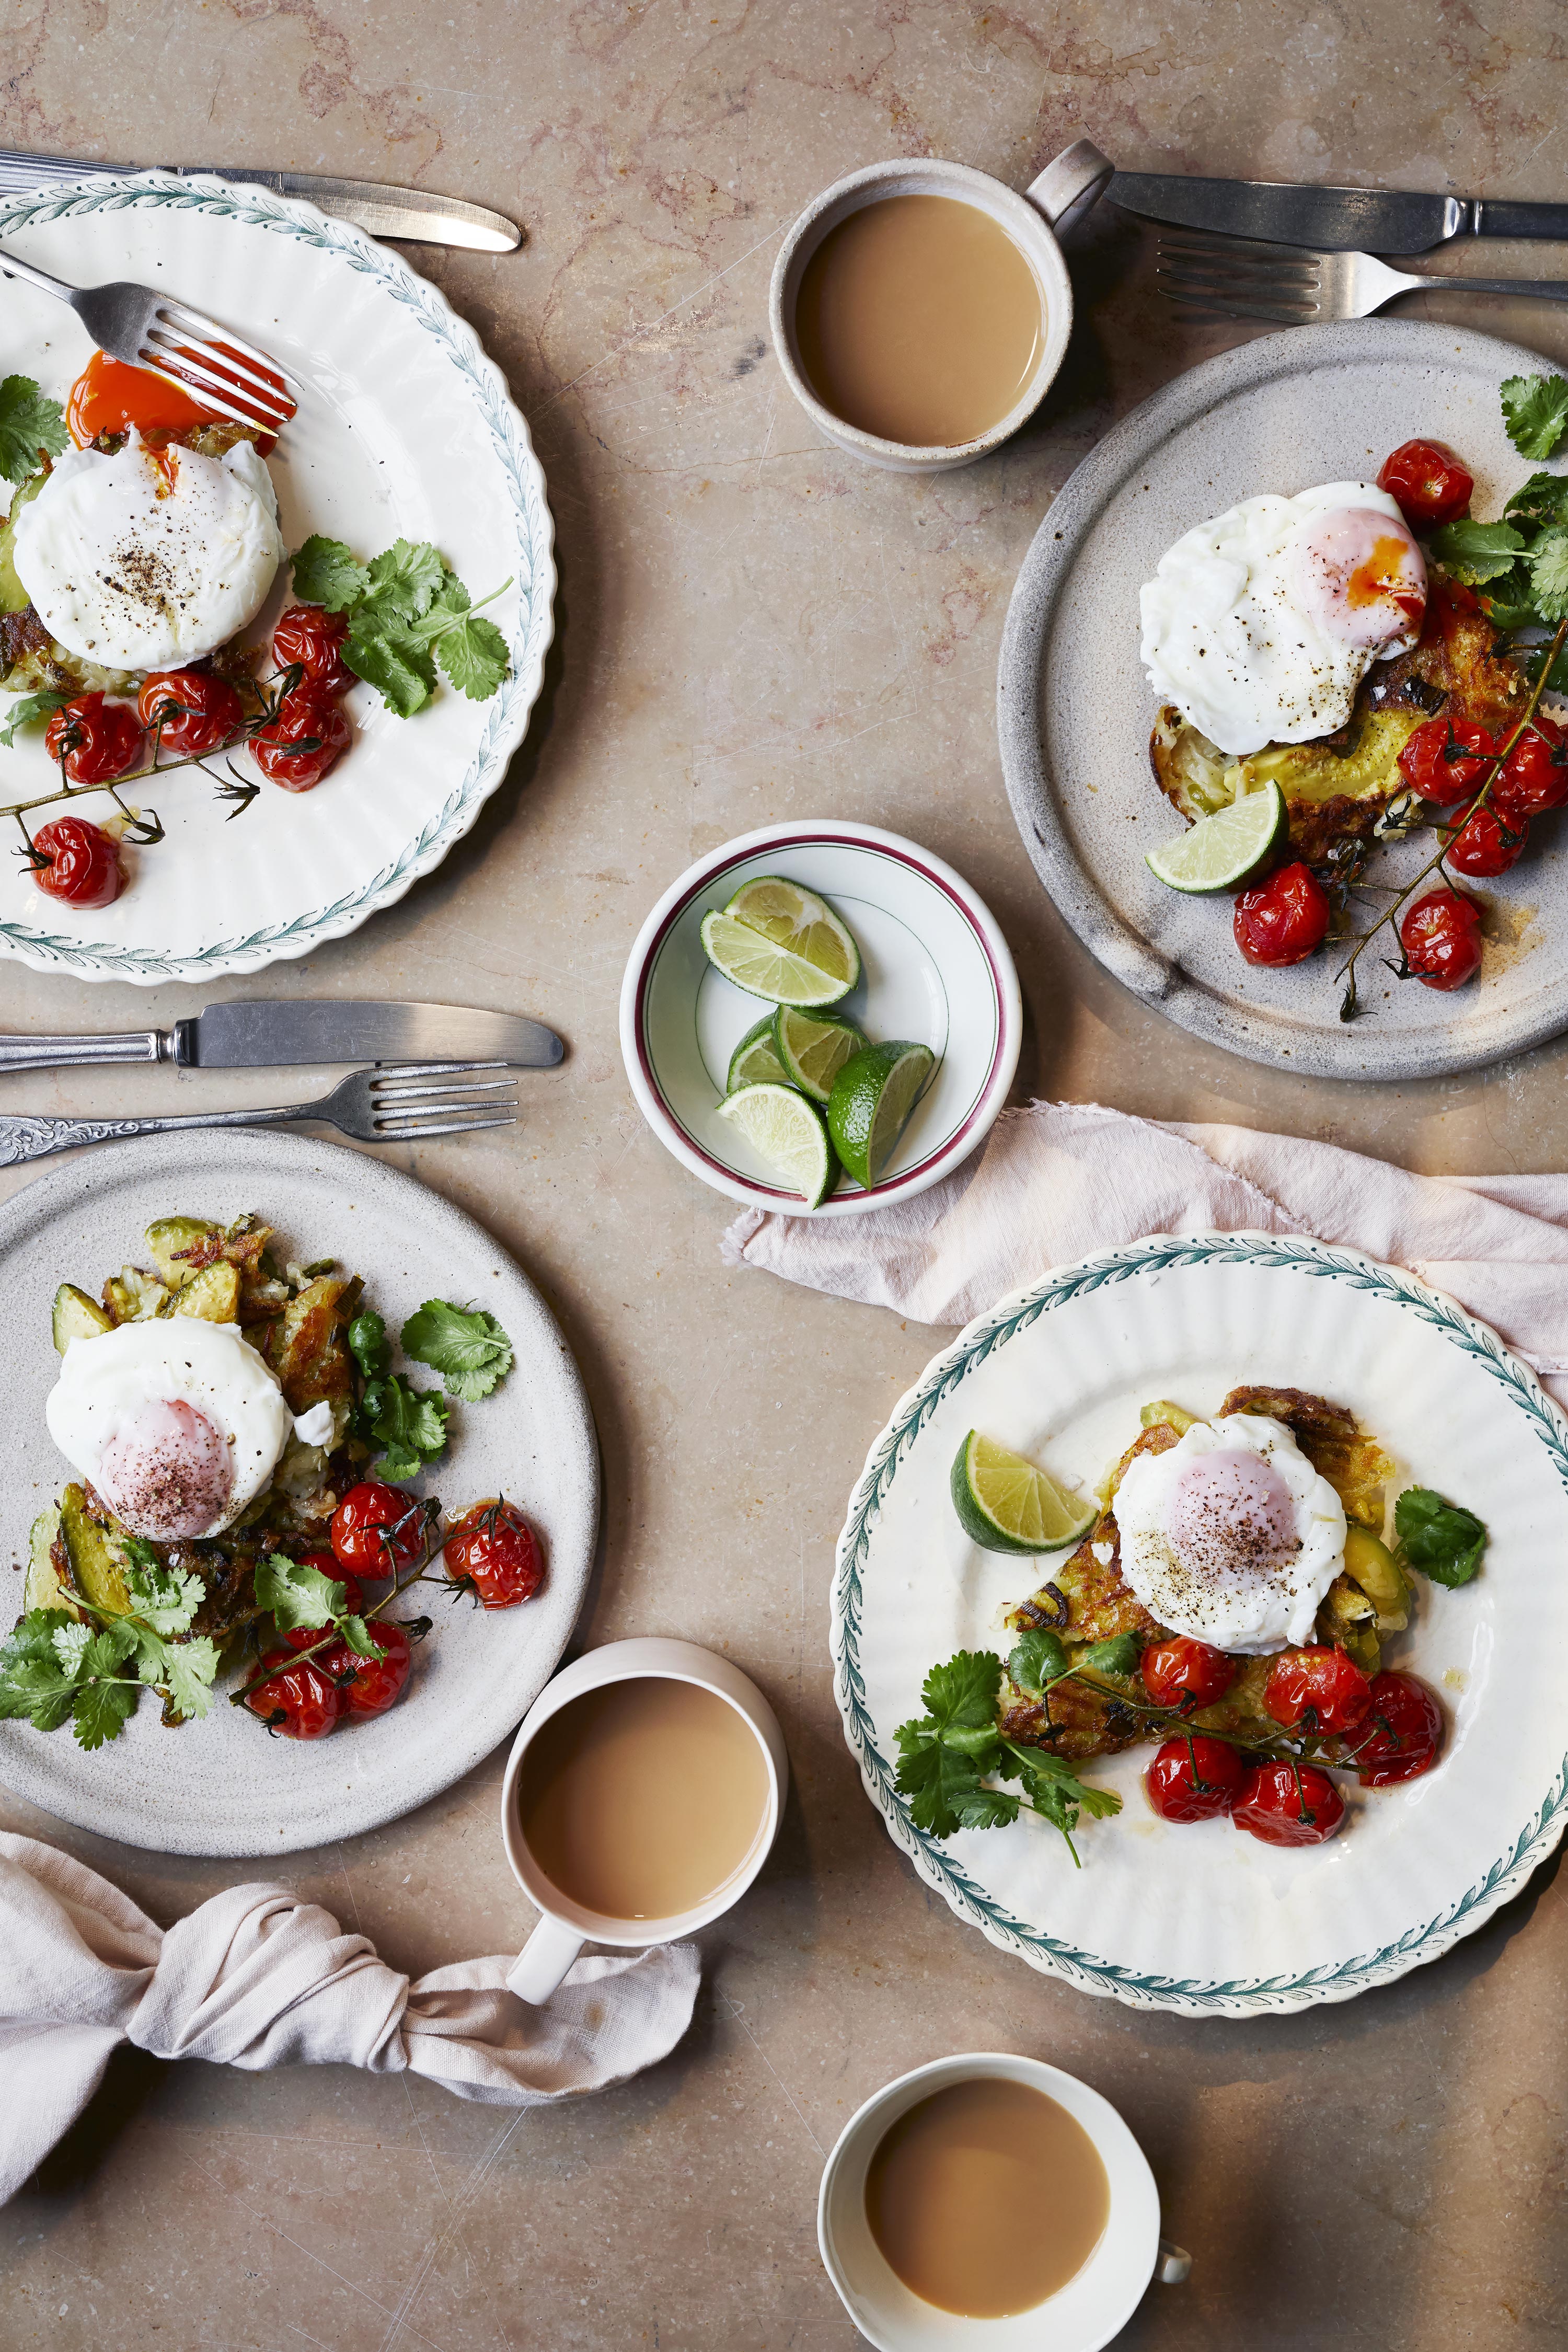 Jamie Oliver's avocado and jalapeno hash brown with poached eggs recipe